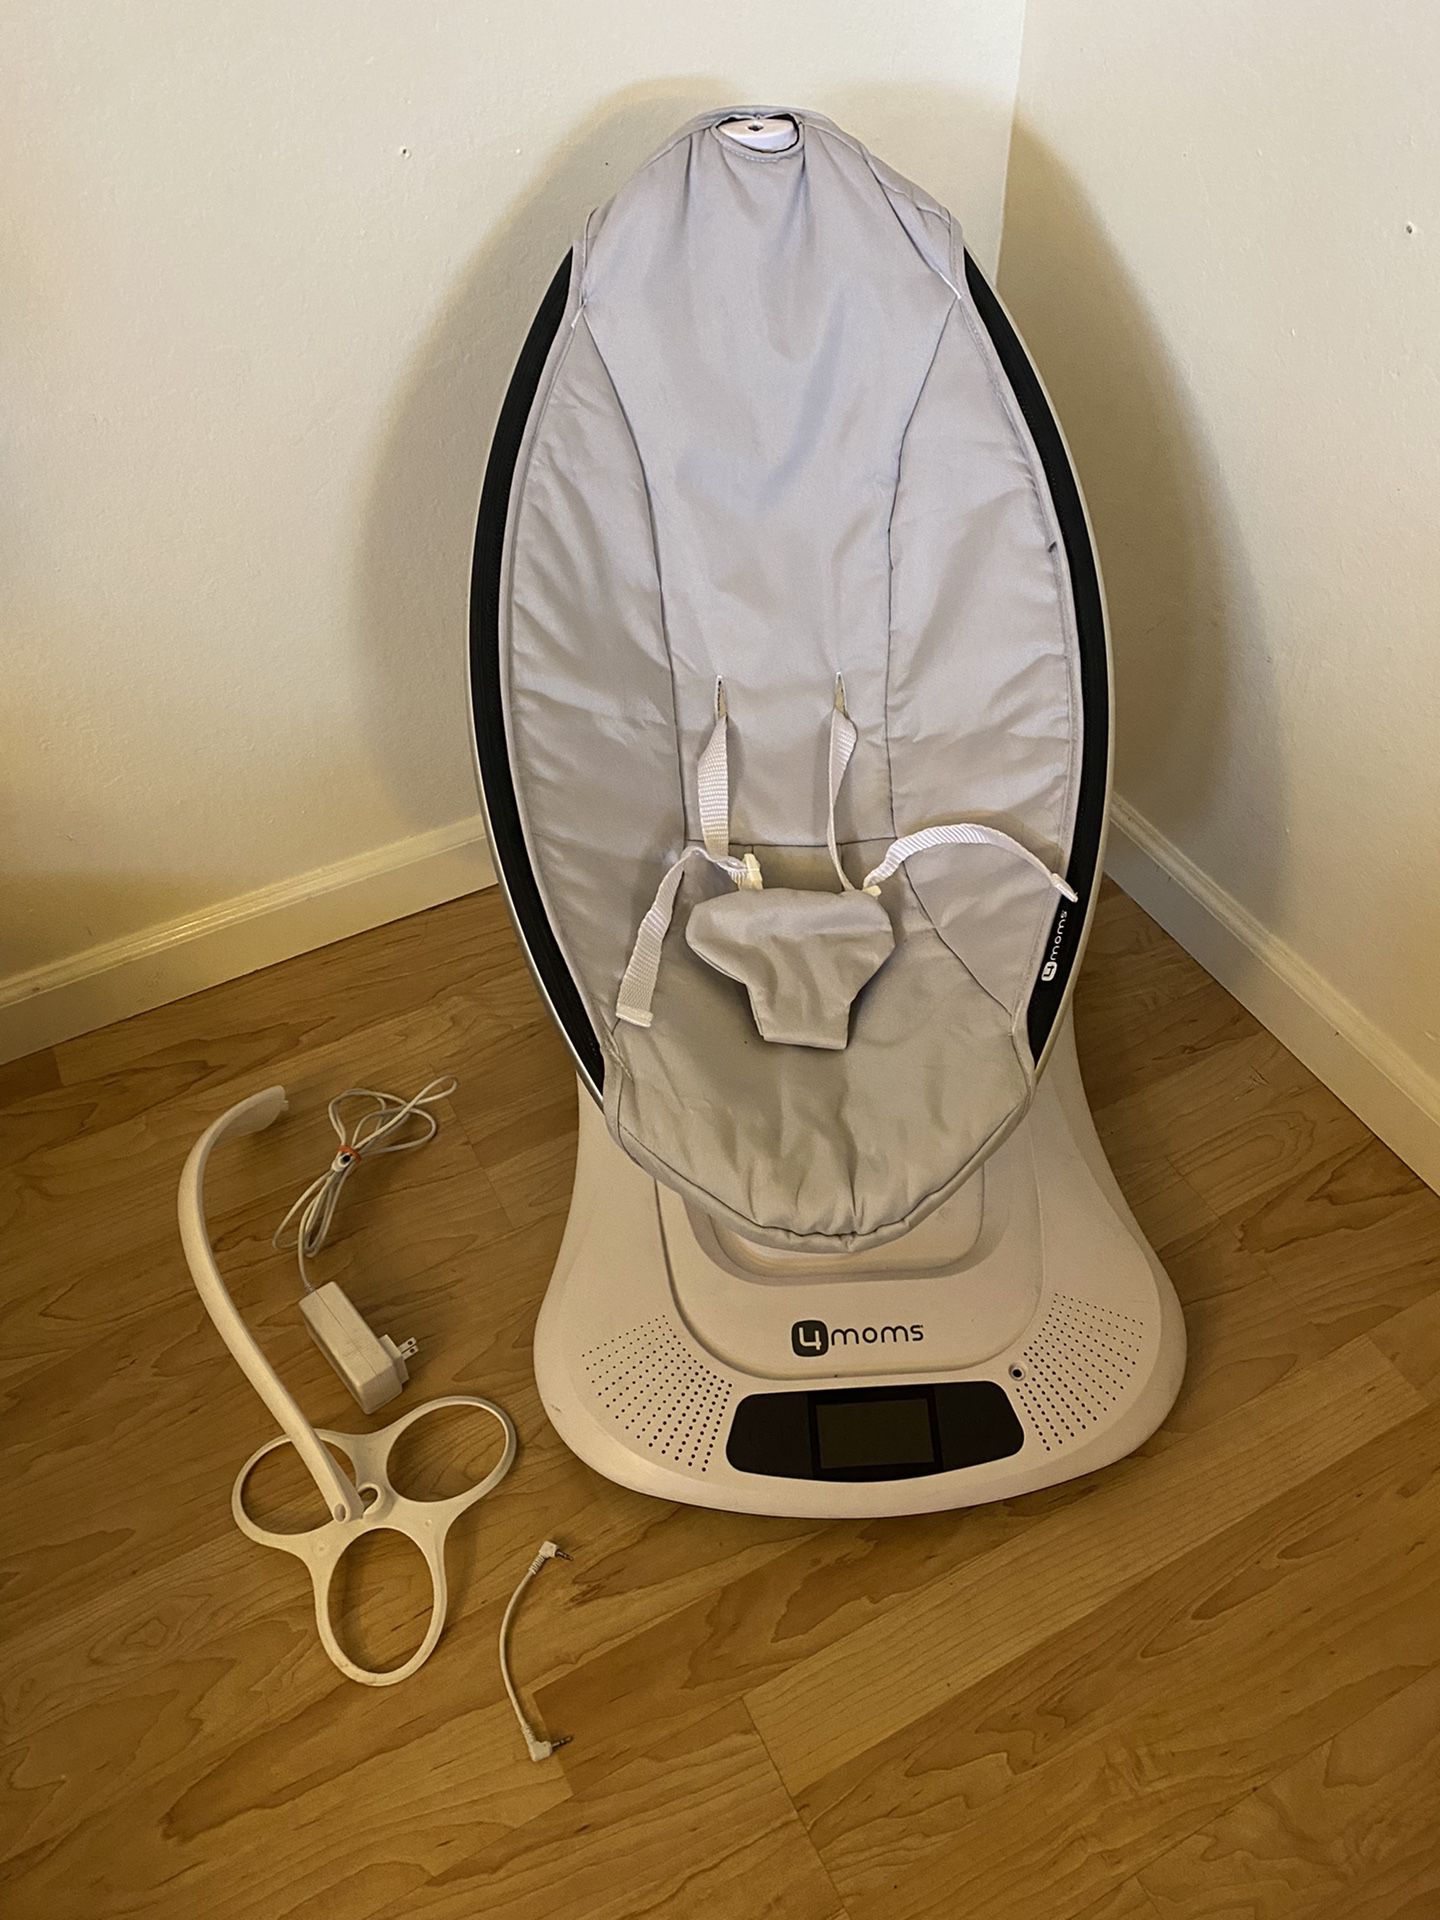 4moms mamaRoo 4 Multi-Motion Baby Swing, Bluetooth Baby Rocker with 5 Unique Motions,